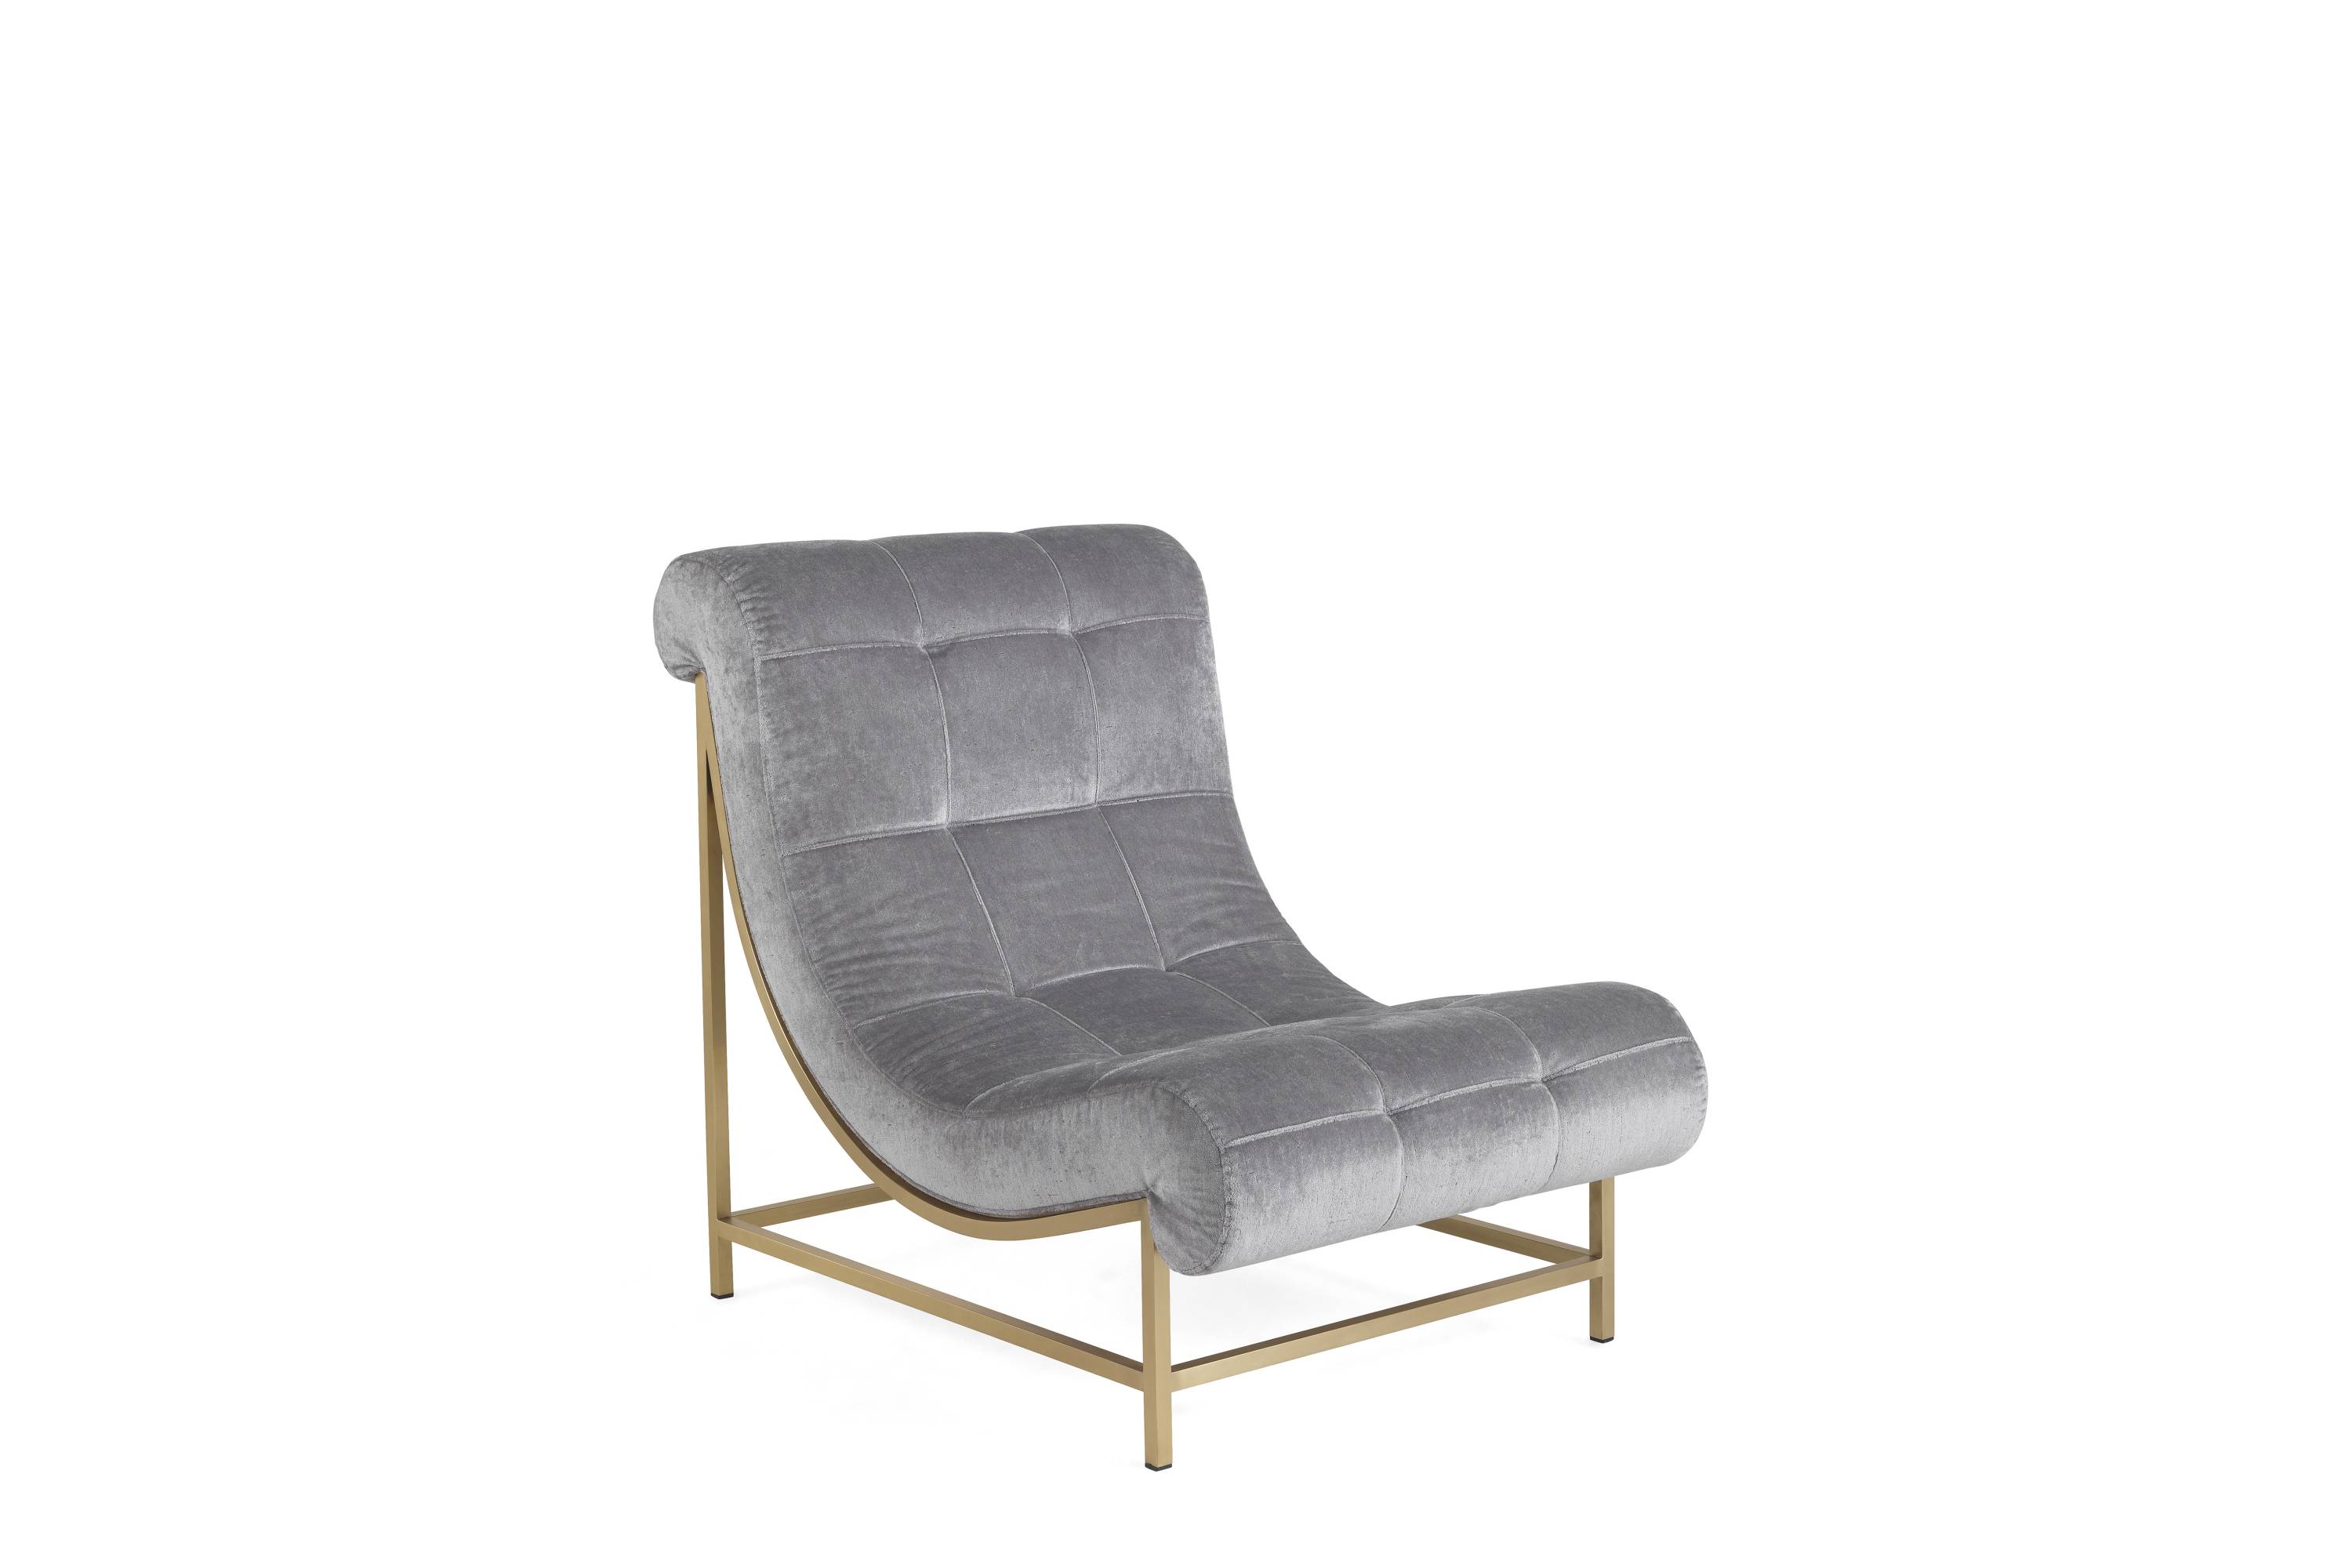 MARQUISE chaise longue - A luxury experience with the Oro Bianco collection and its classic luxurious furniture